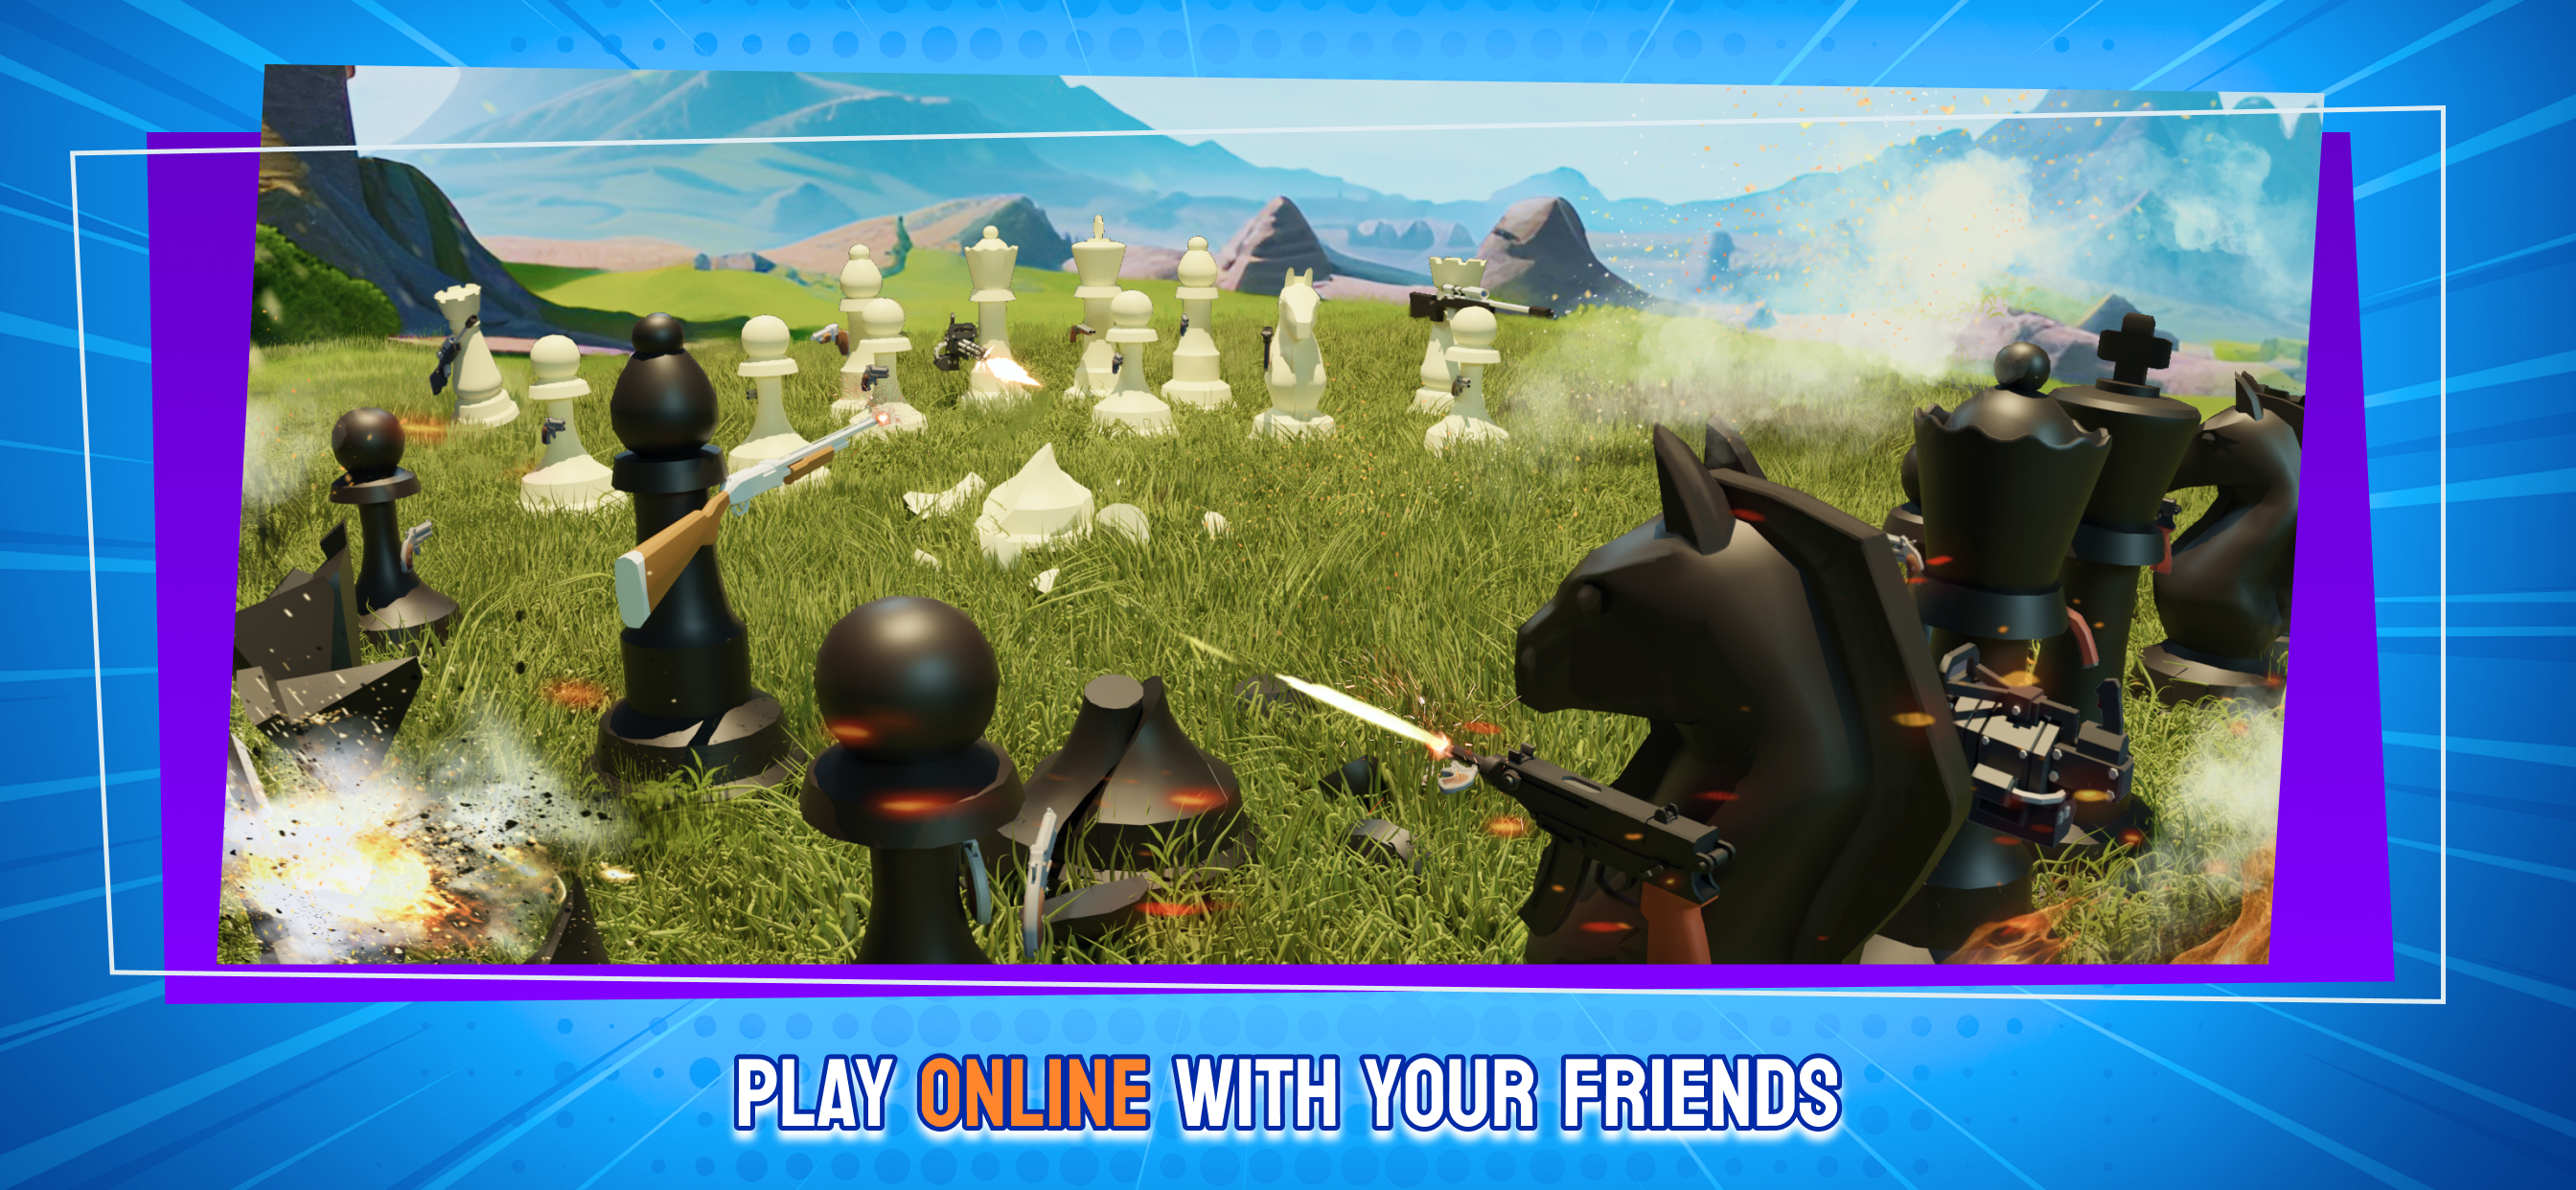 a thumbnail for a  video abous first person shooter chess